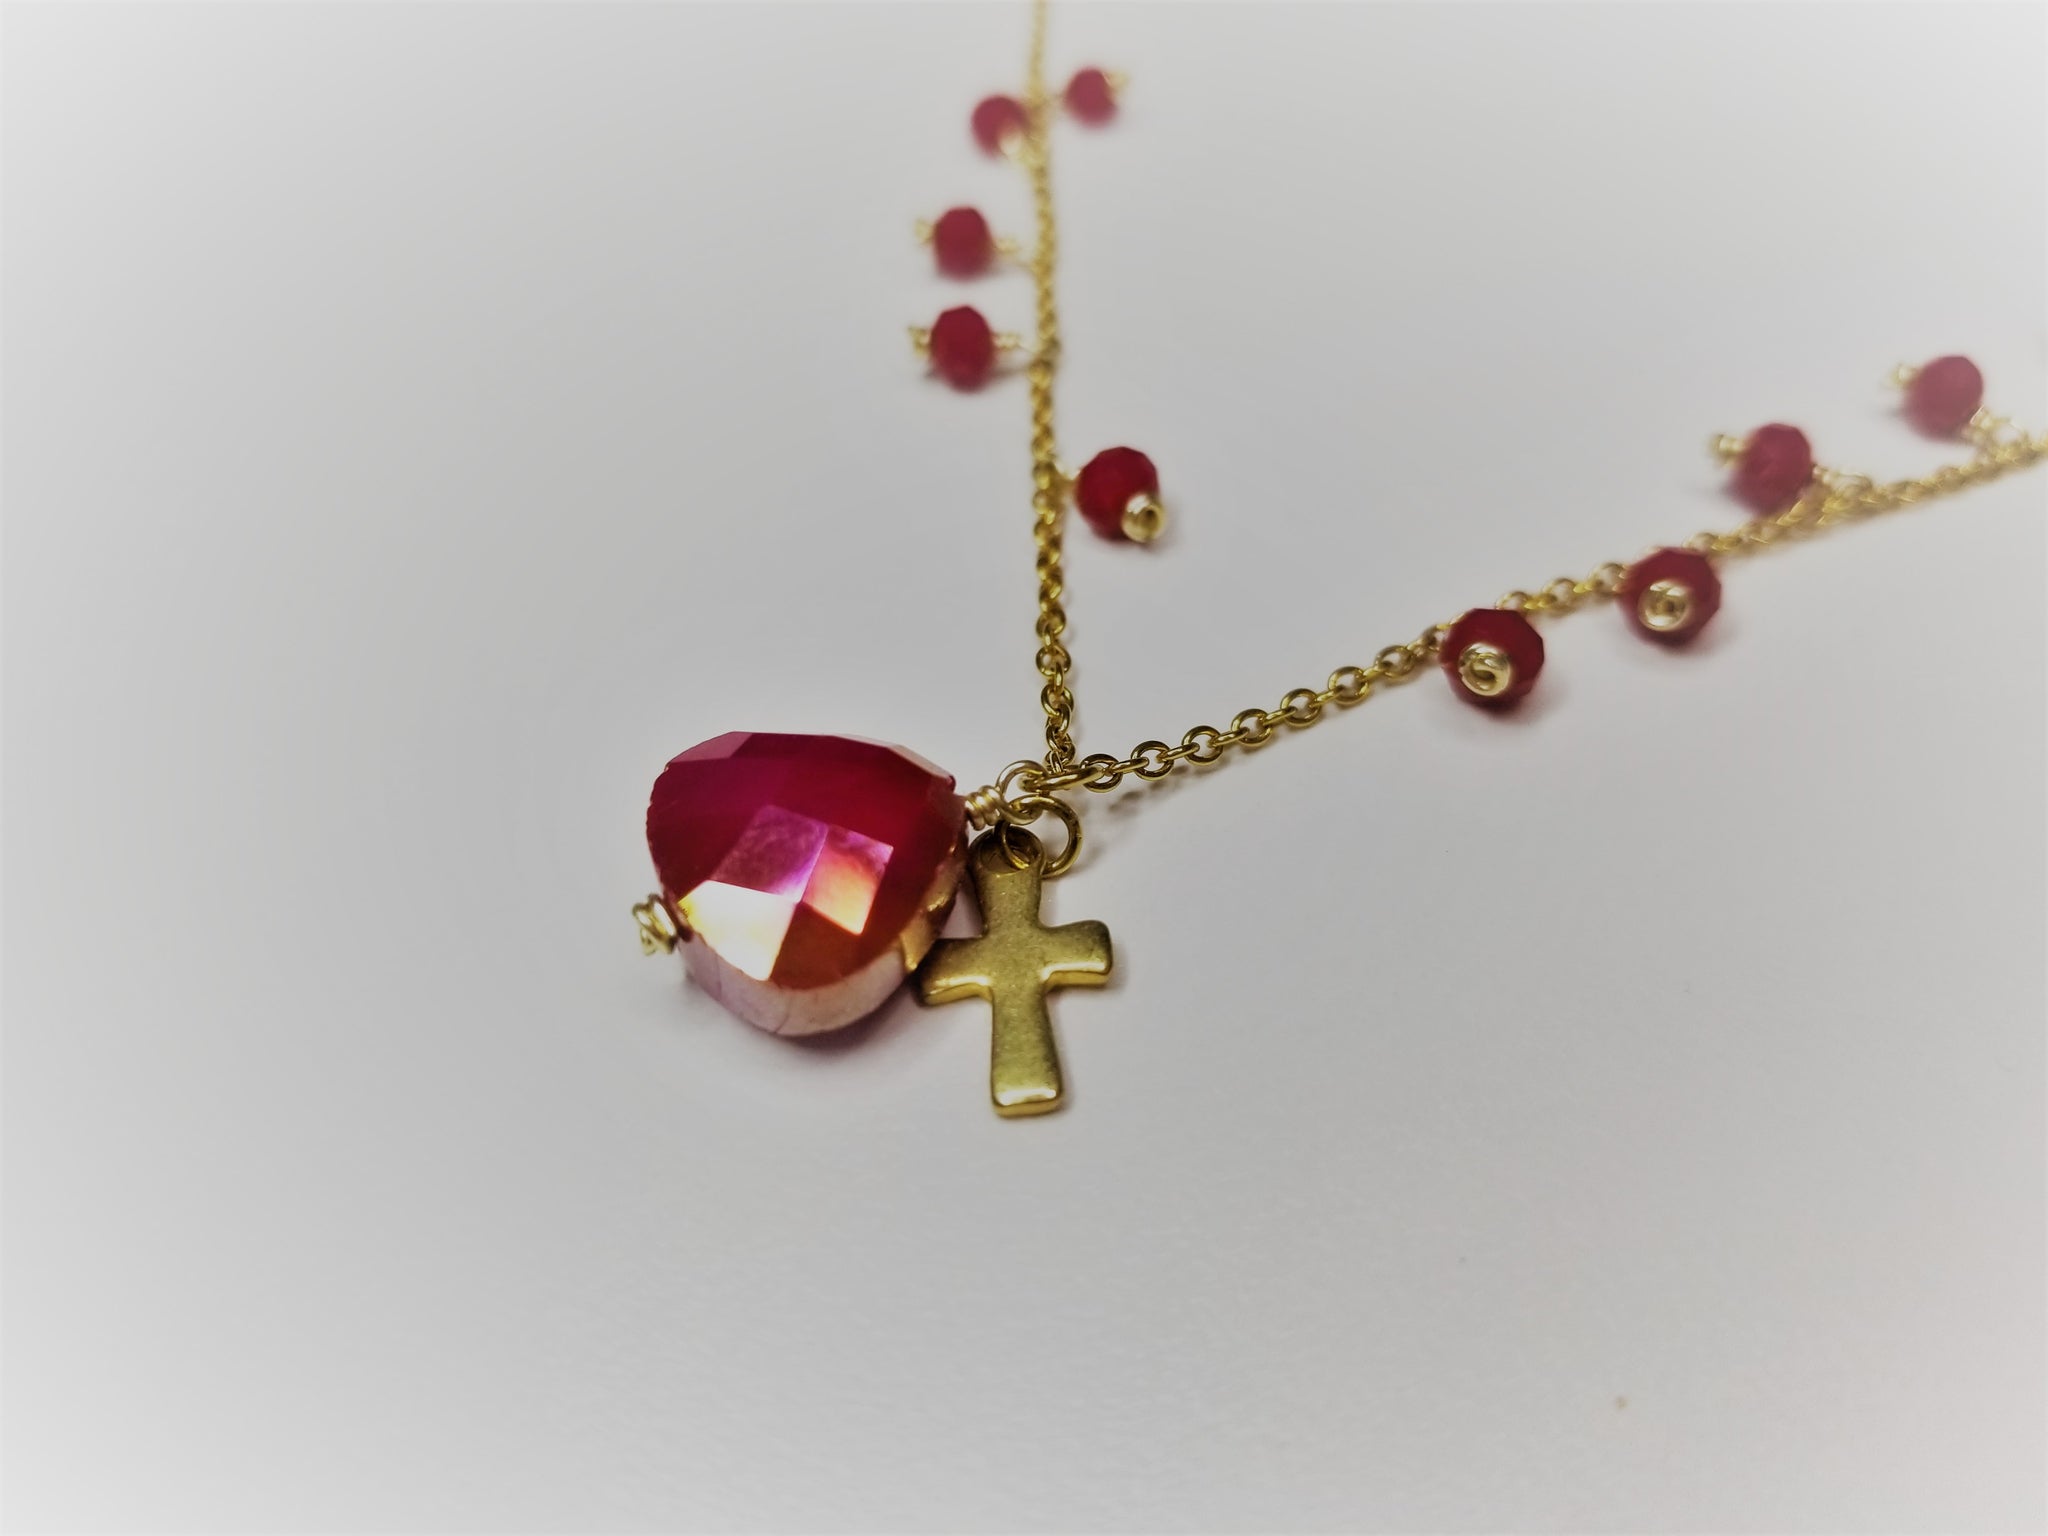 Gold metal necklace with red beads and cross